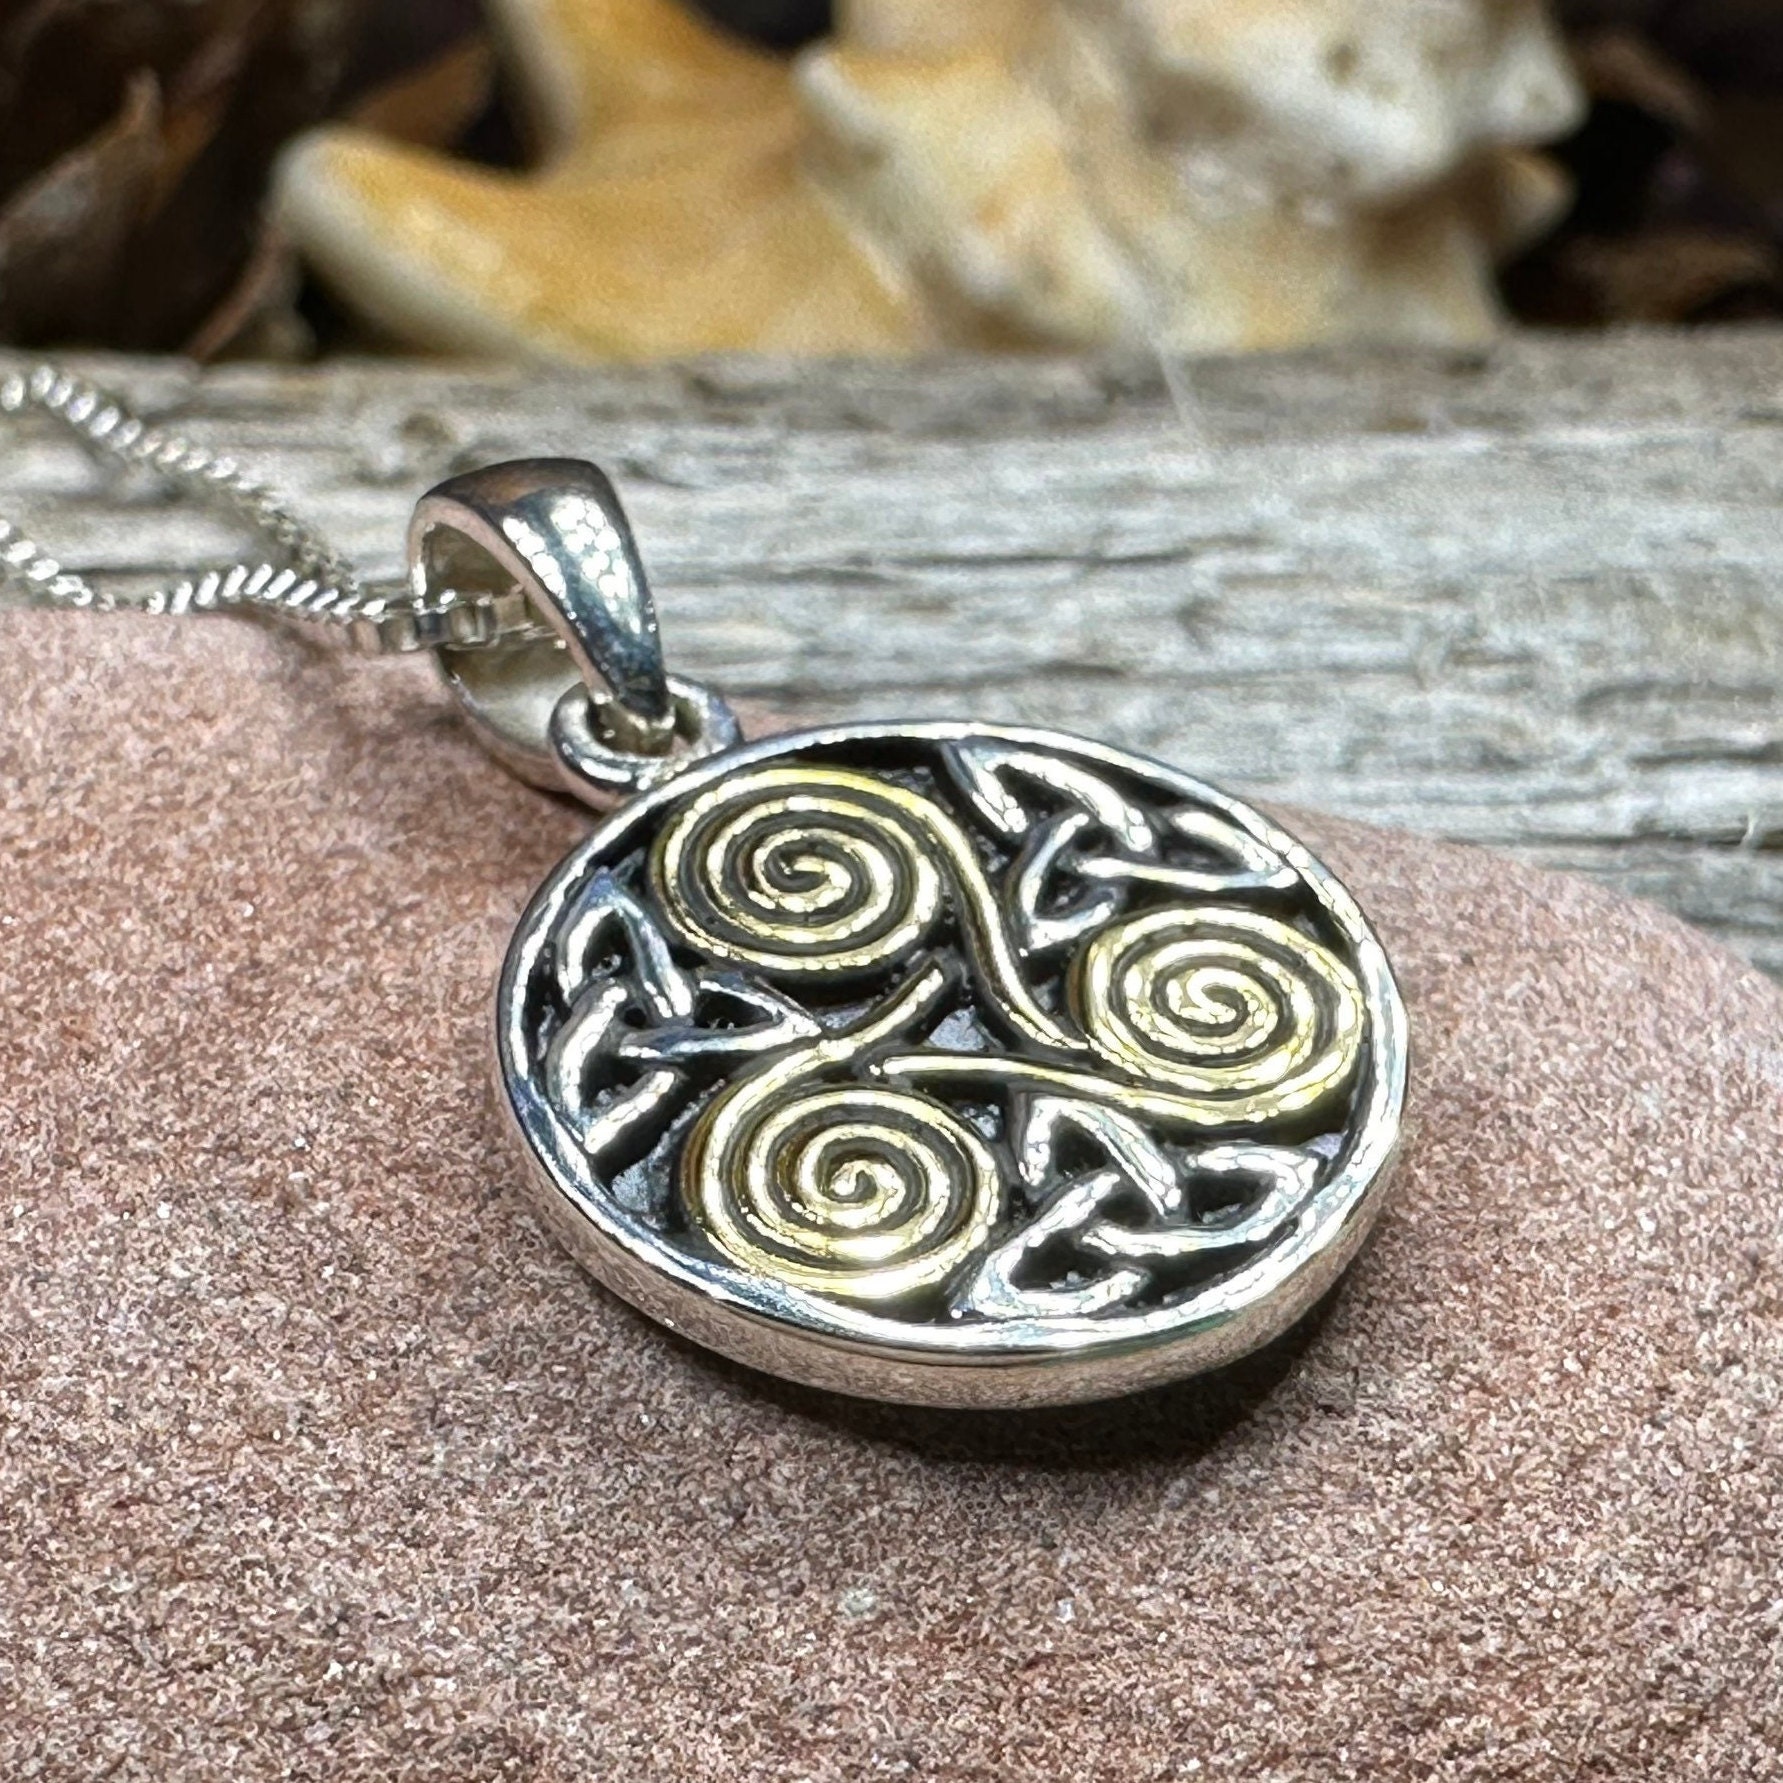 Sapphire Celtic Spiral Necklace - 14K Yellow Gold with White Sapphires –  circinn